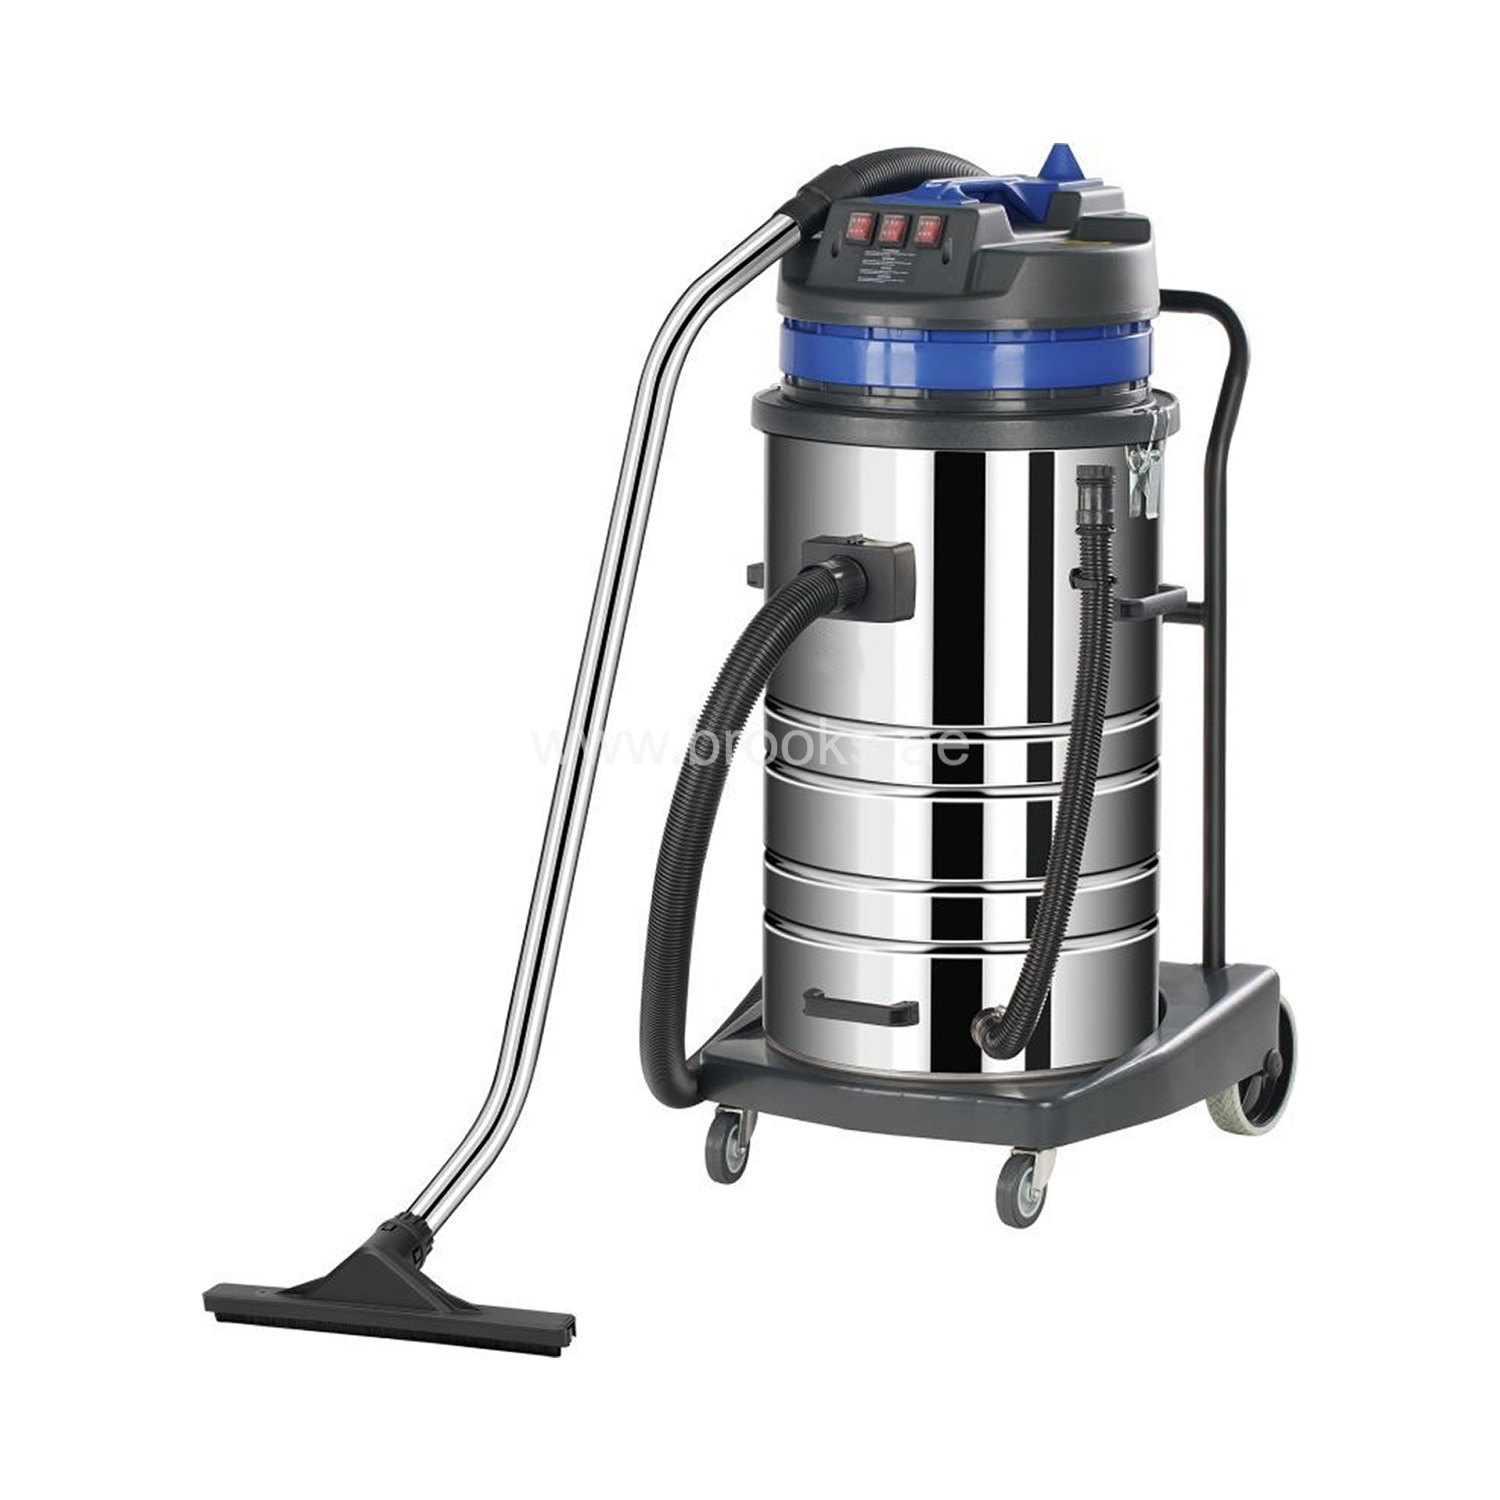 Brooks Wet and Dry Vacuum Cleaner 80Ltr